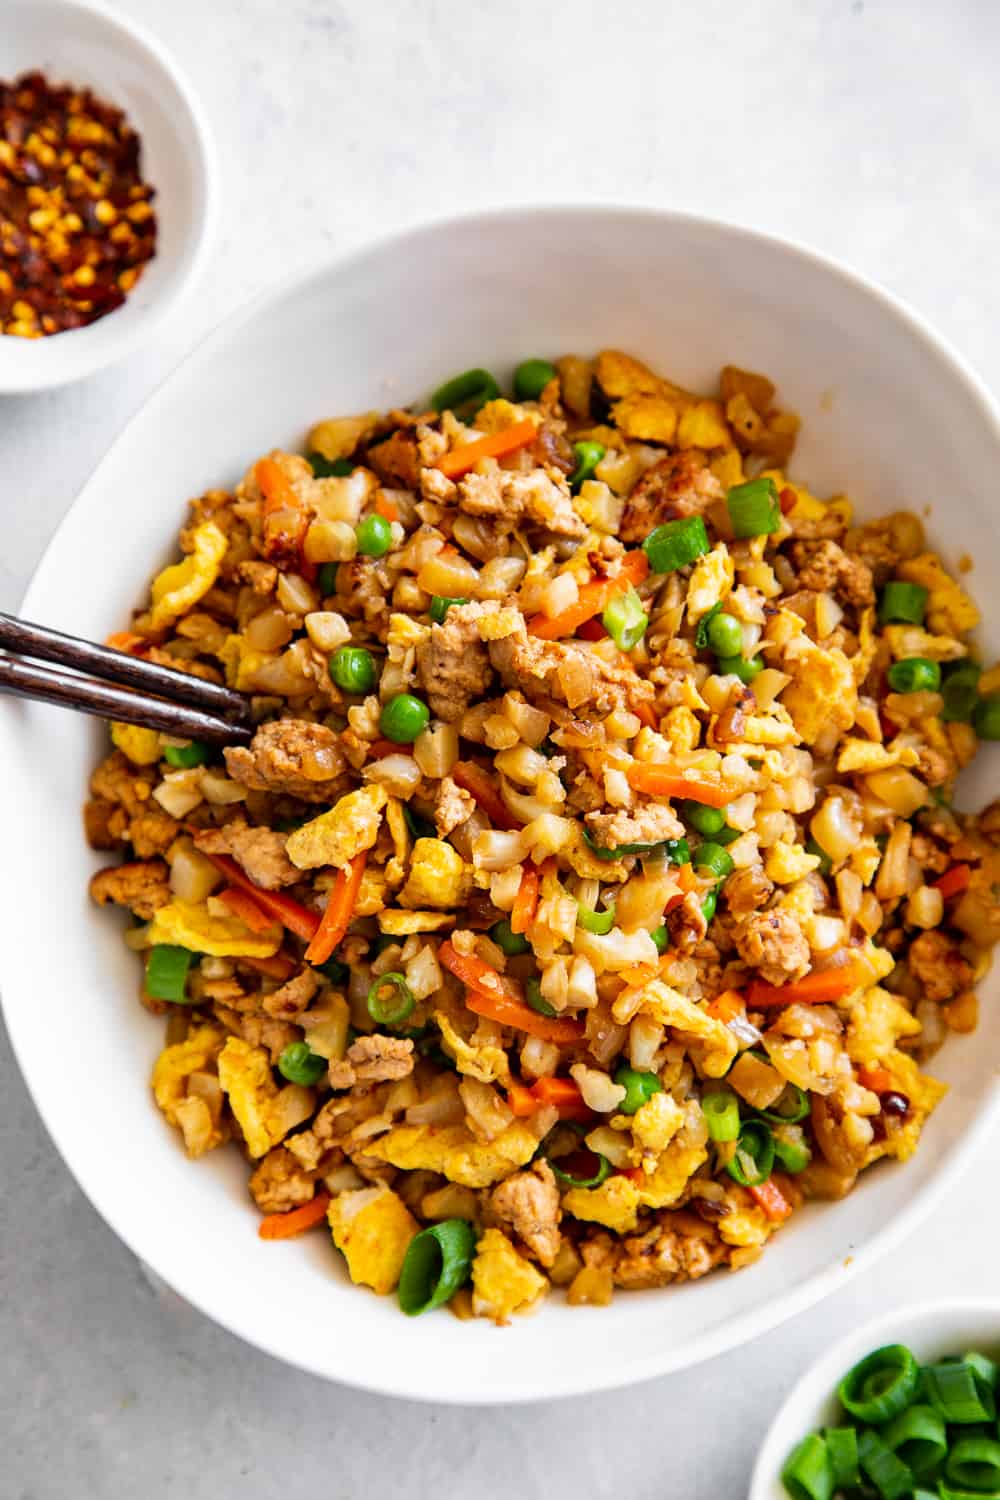 This Cauliflower Pork Fried Rice is loaded with flavor, protein, veggies and healthy fats and makes a fast weeknight meal that everyone will love.  Paleo, Whole30, low carb and kid approved! #paleo #whole30 #keto #cleaneating